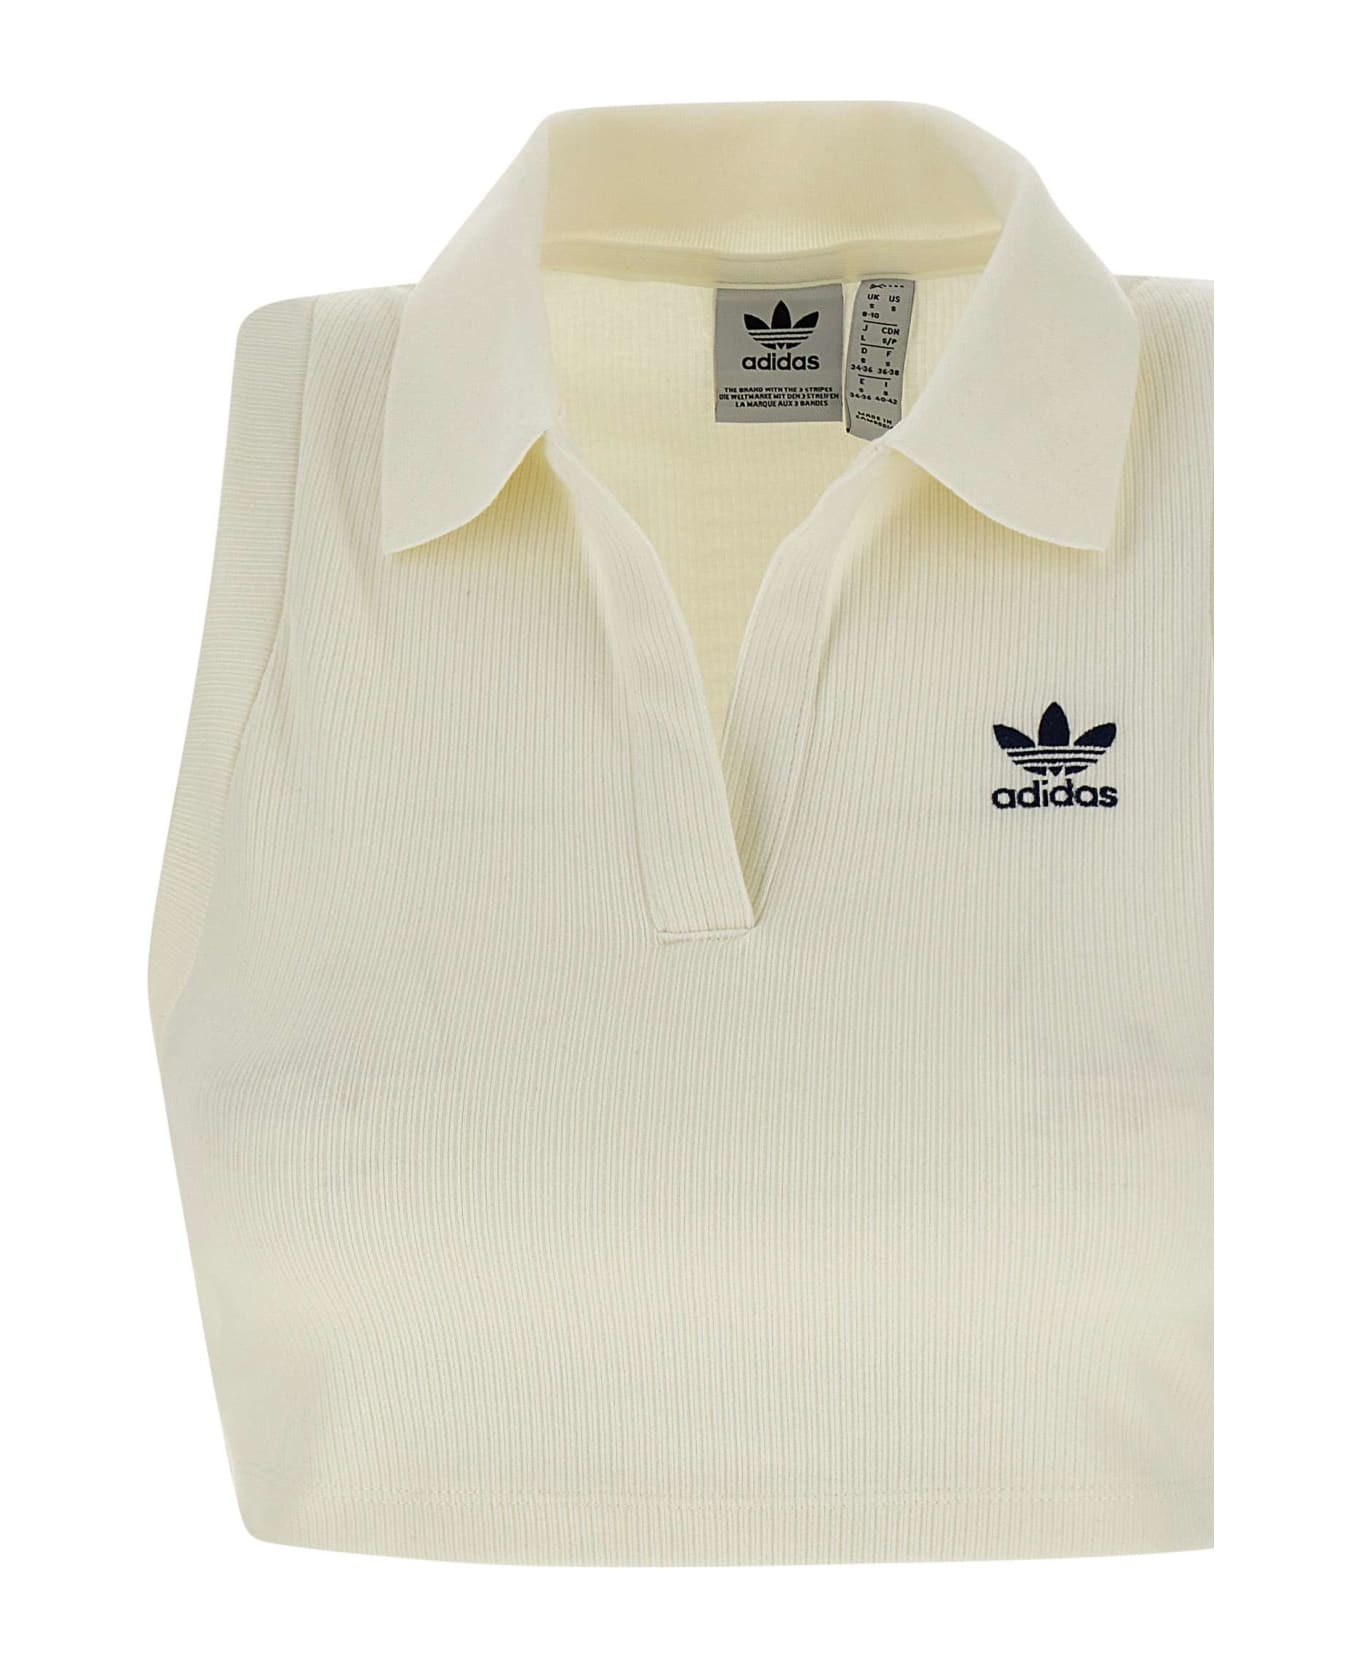 Adidas Cotton And Viscose Top - WHITE